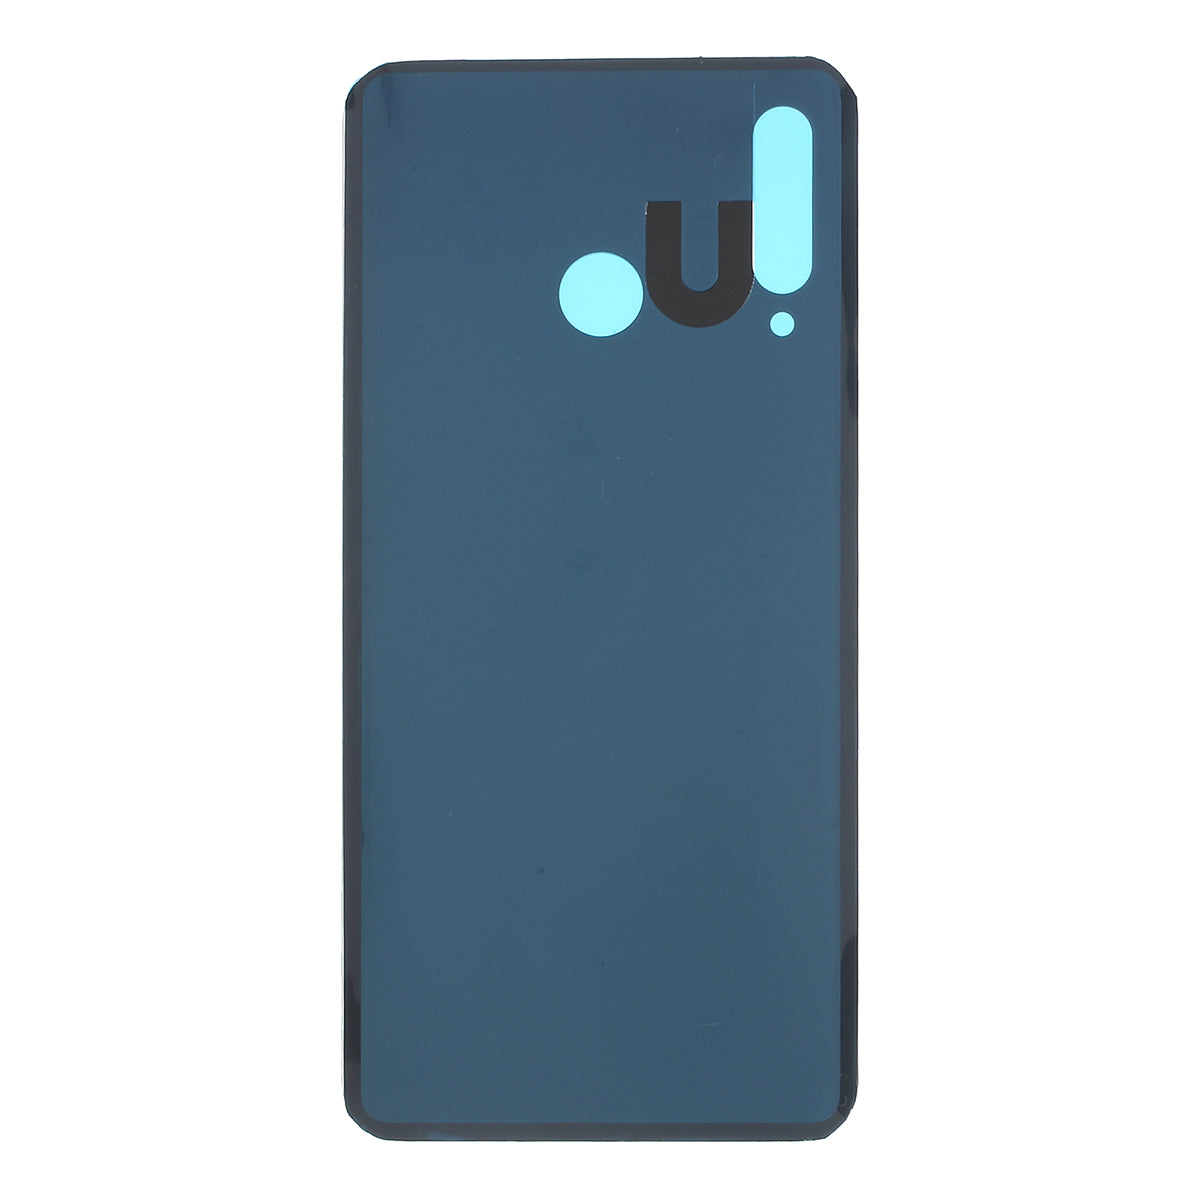 Battery Housing Door Cover Replacement for Huawei P30 Lite with 48MP Camera - Black